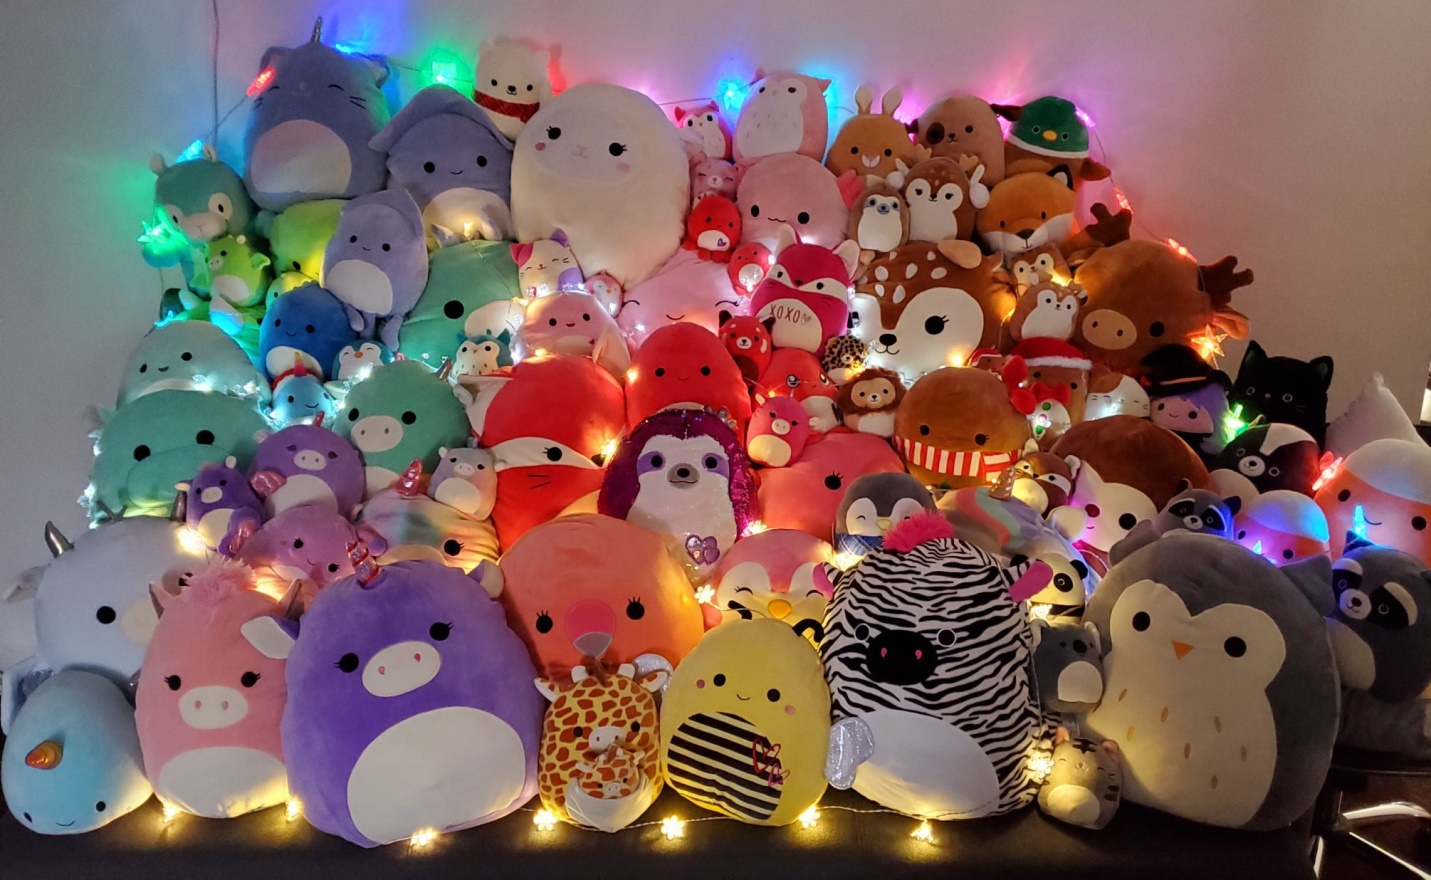 Five Reasons Why Plush Toys Make Excellent Gifts￼